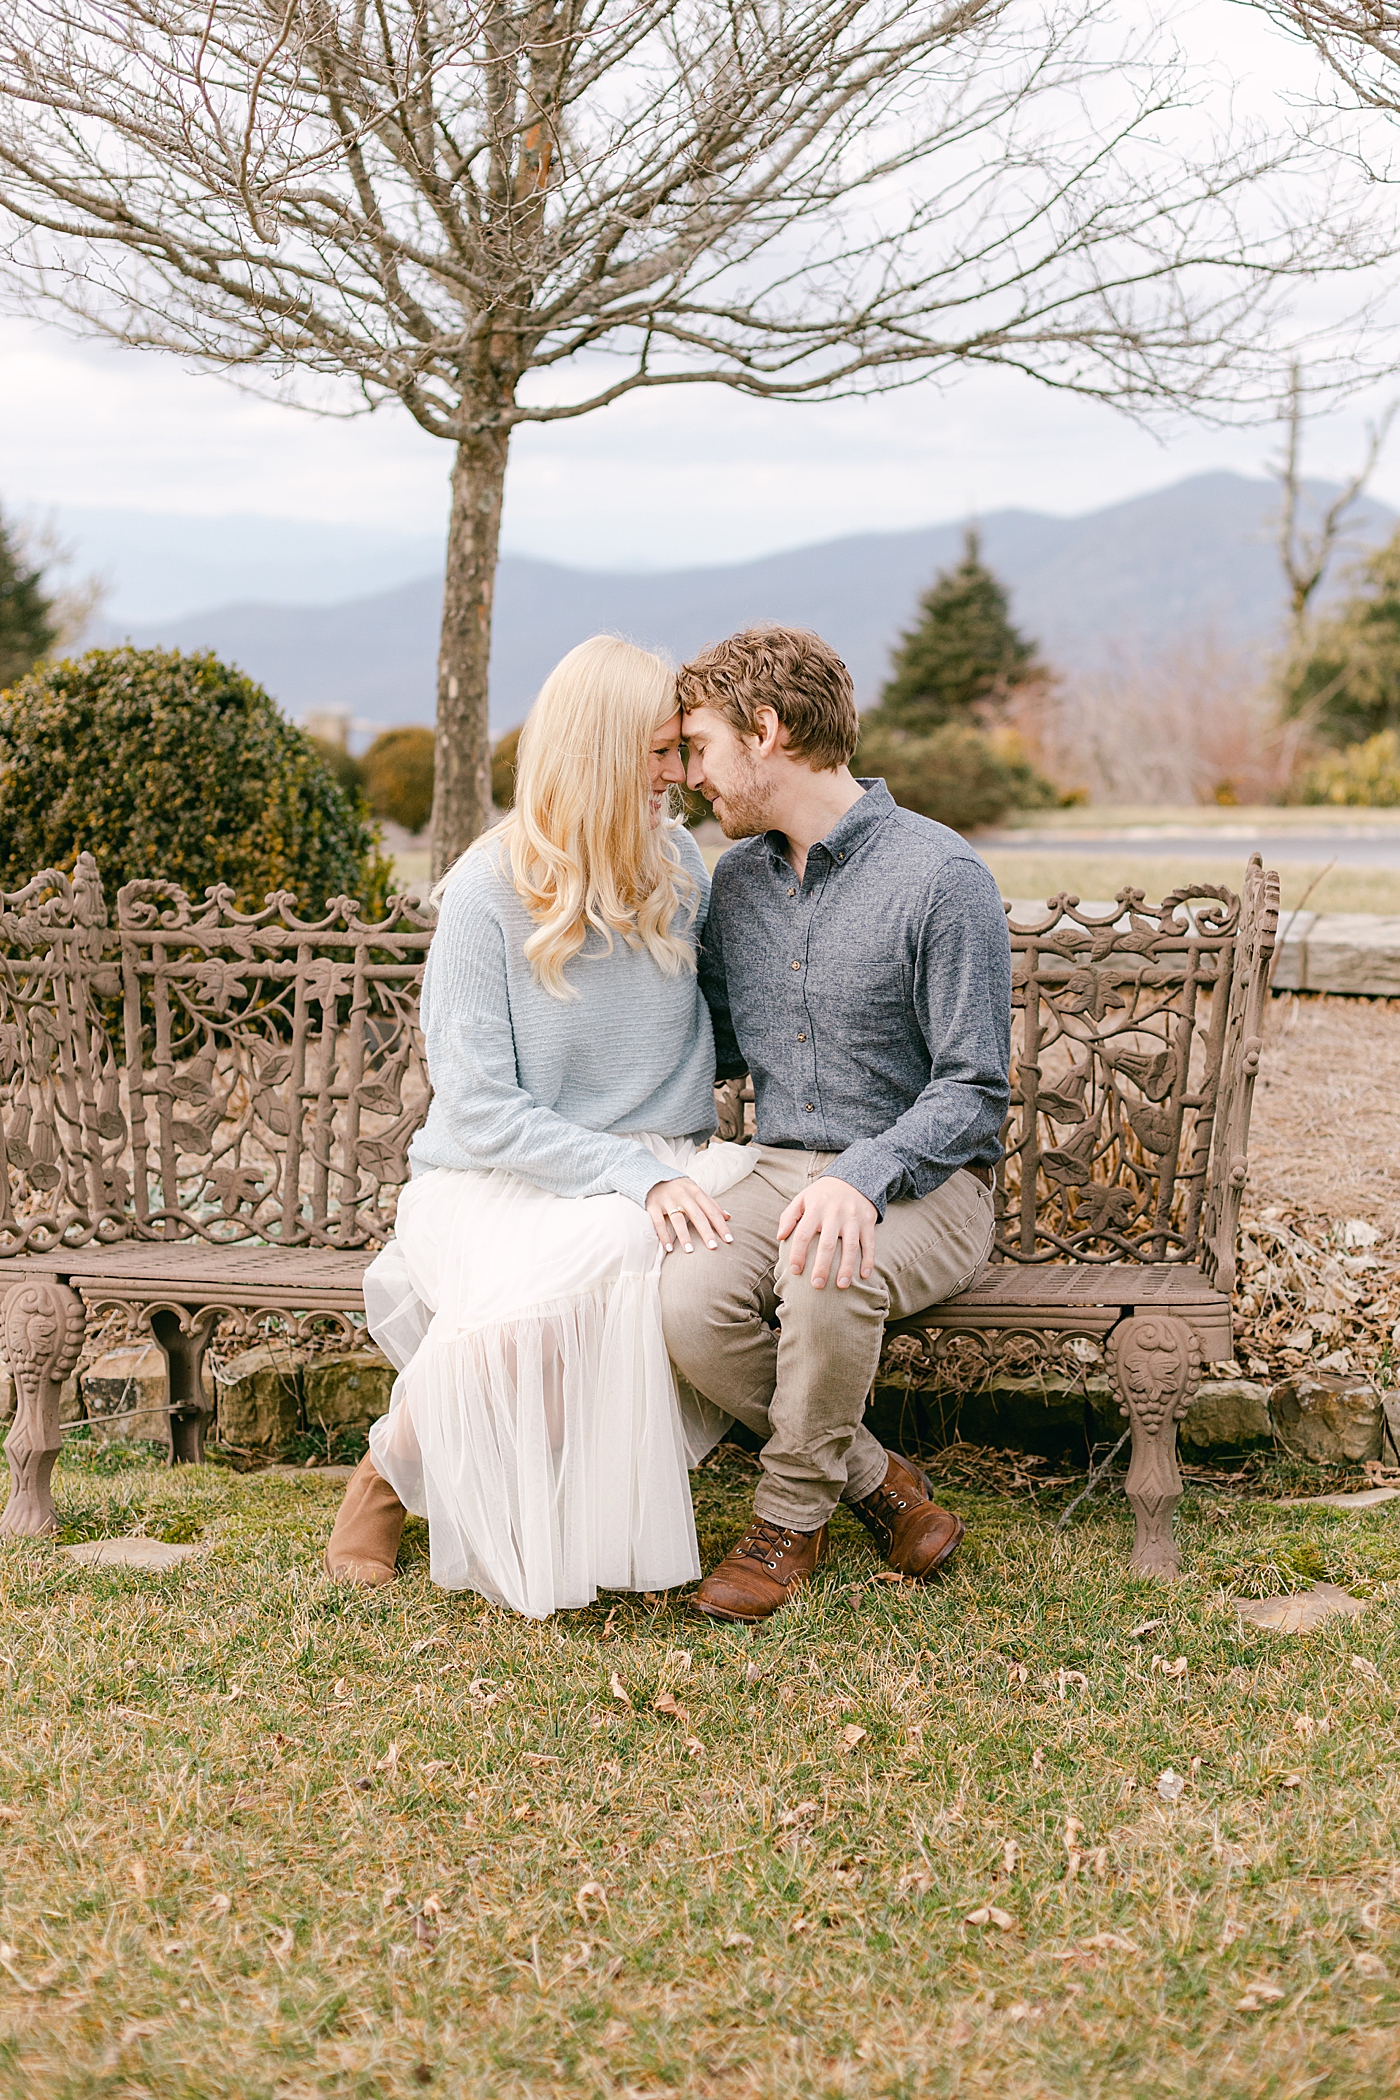 Couple sitting on a bench | Image by Hope Helmuth Photography